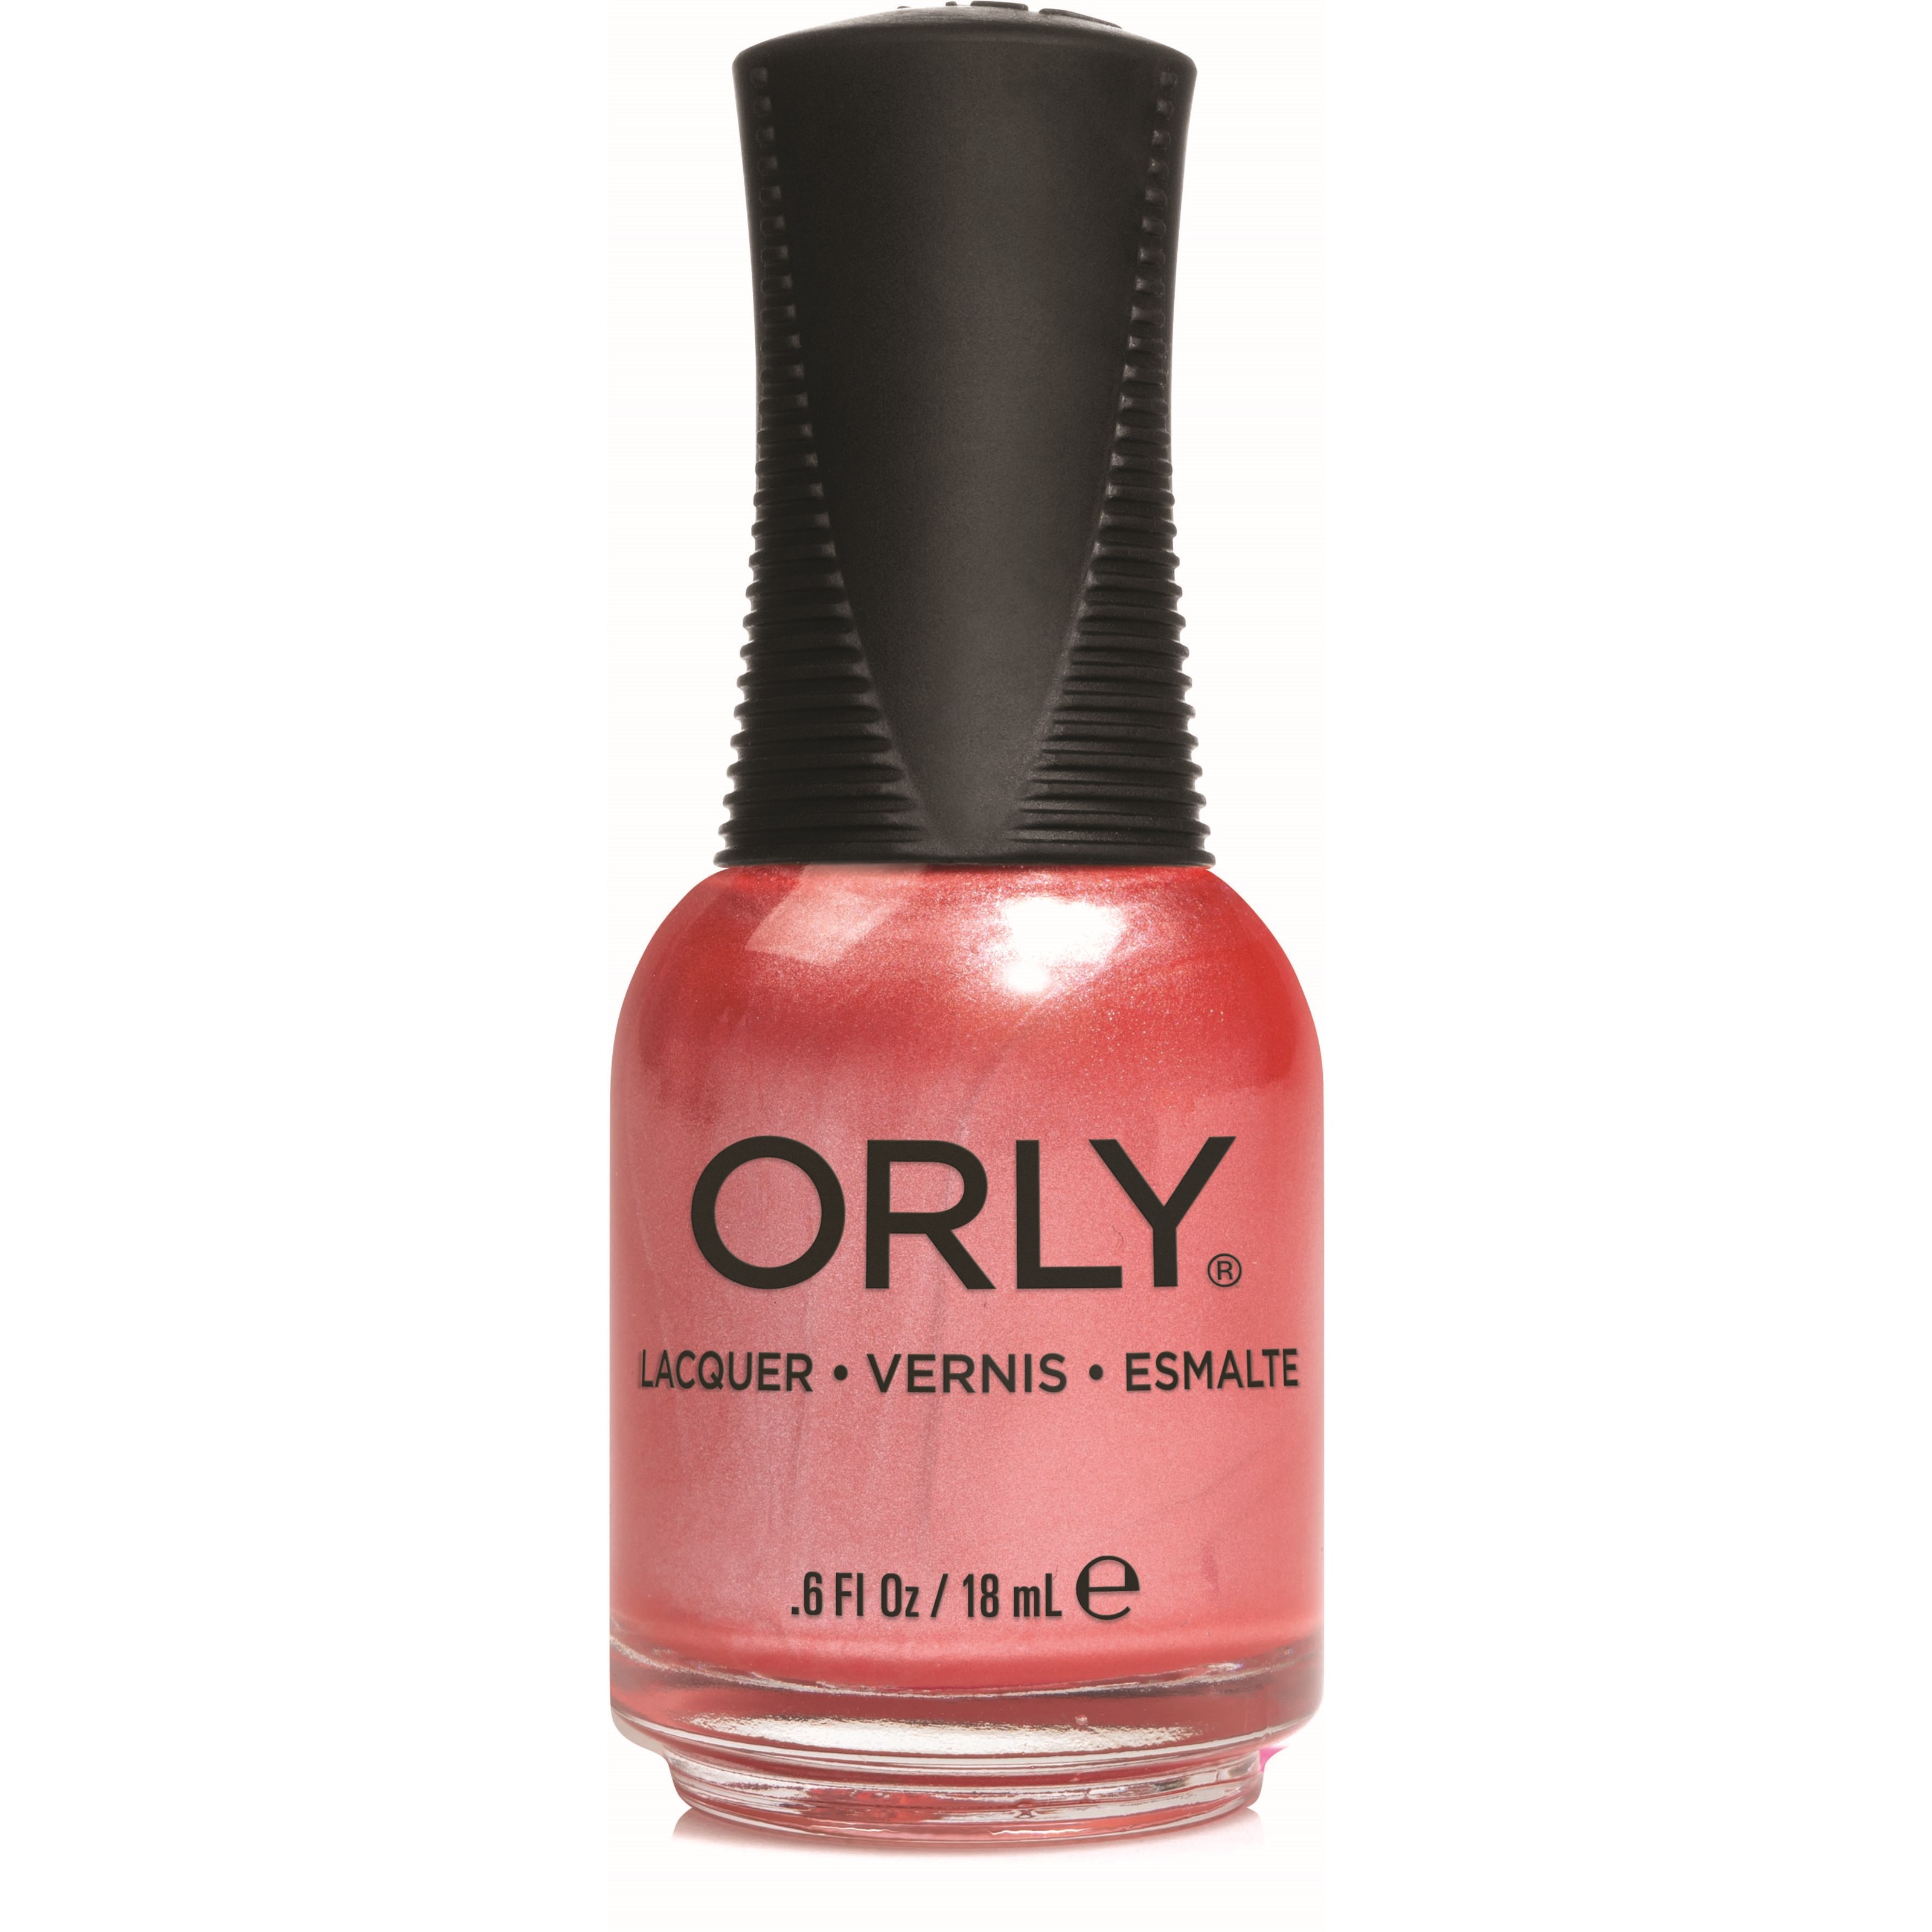 ORLY Lacquer Follow The Map